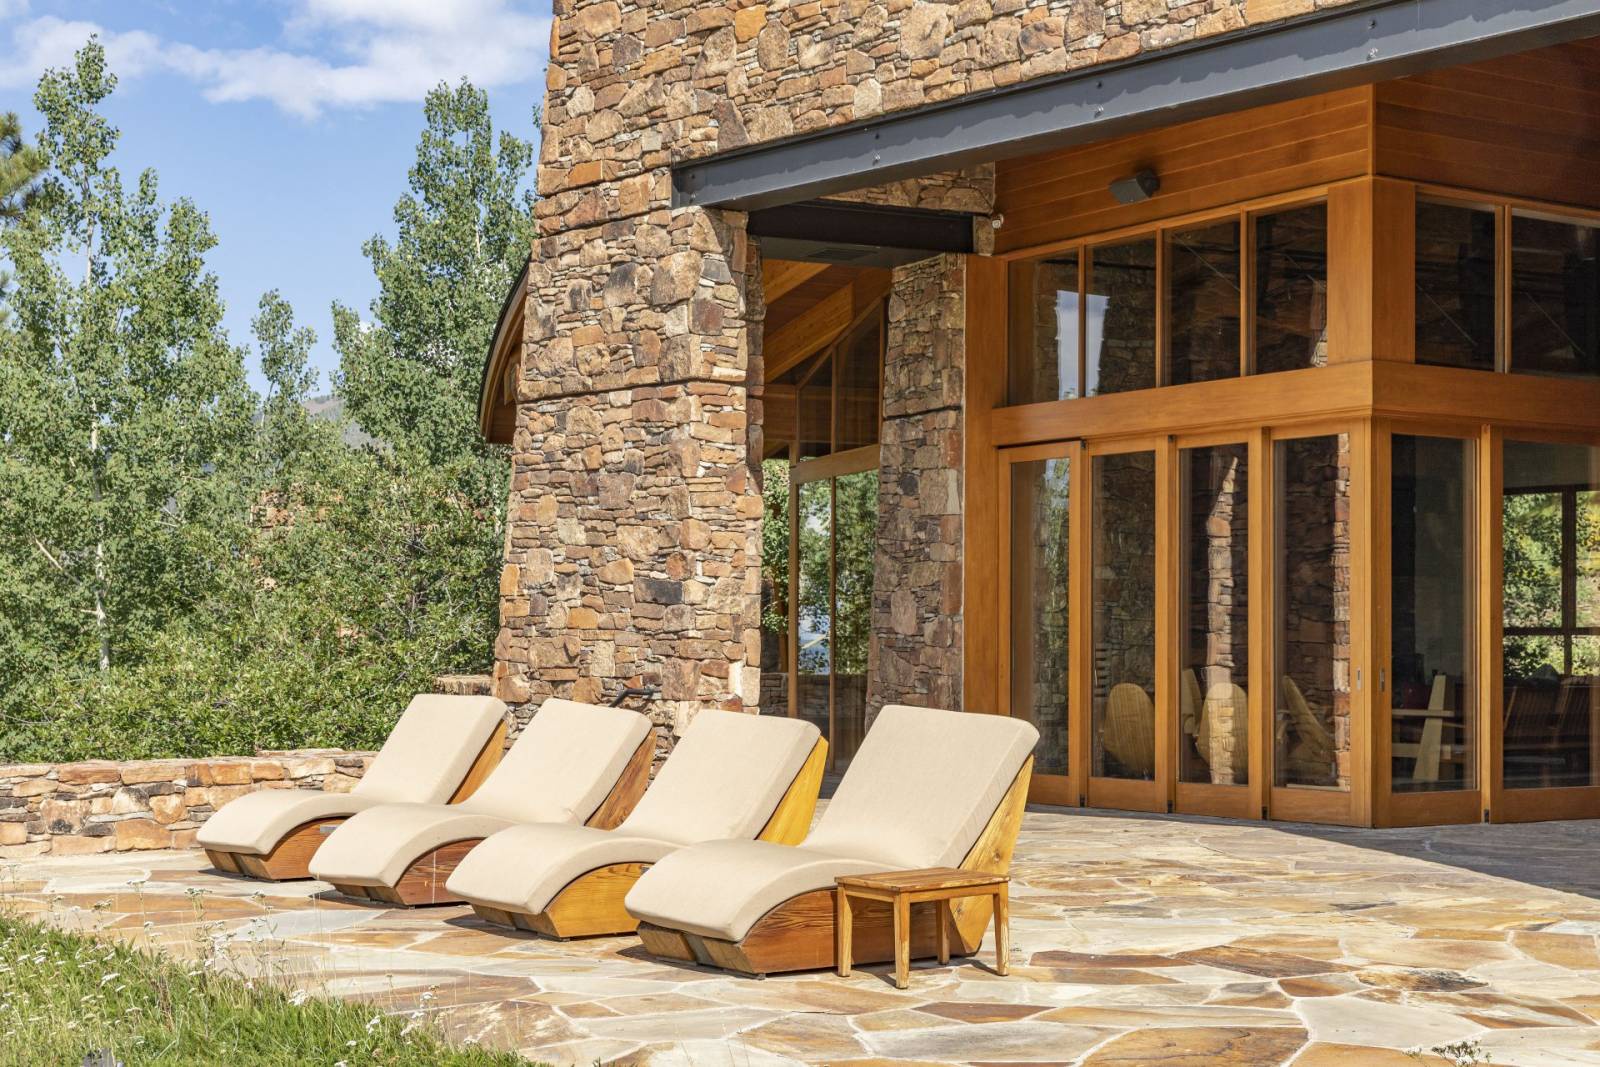 Telluride Vacation Rentals, PaGomo* - On sunny days lay outside for some Vitamin D!